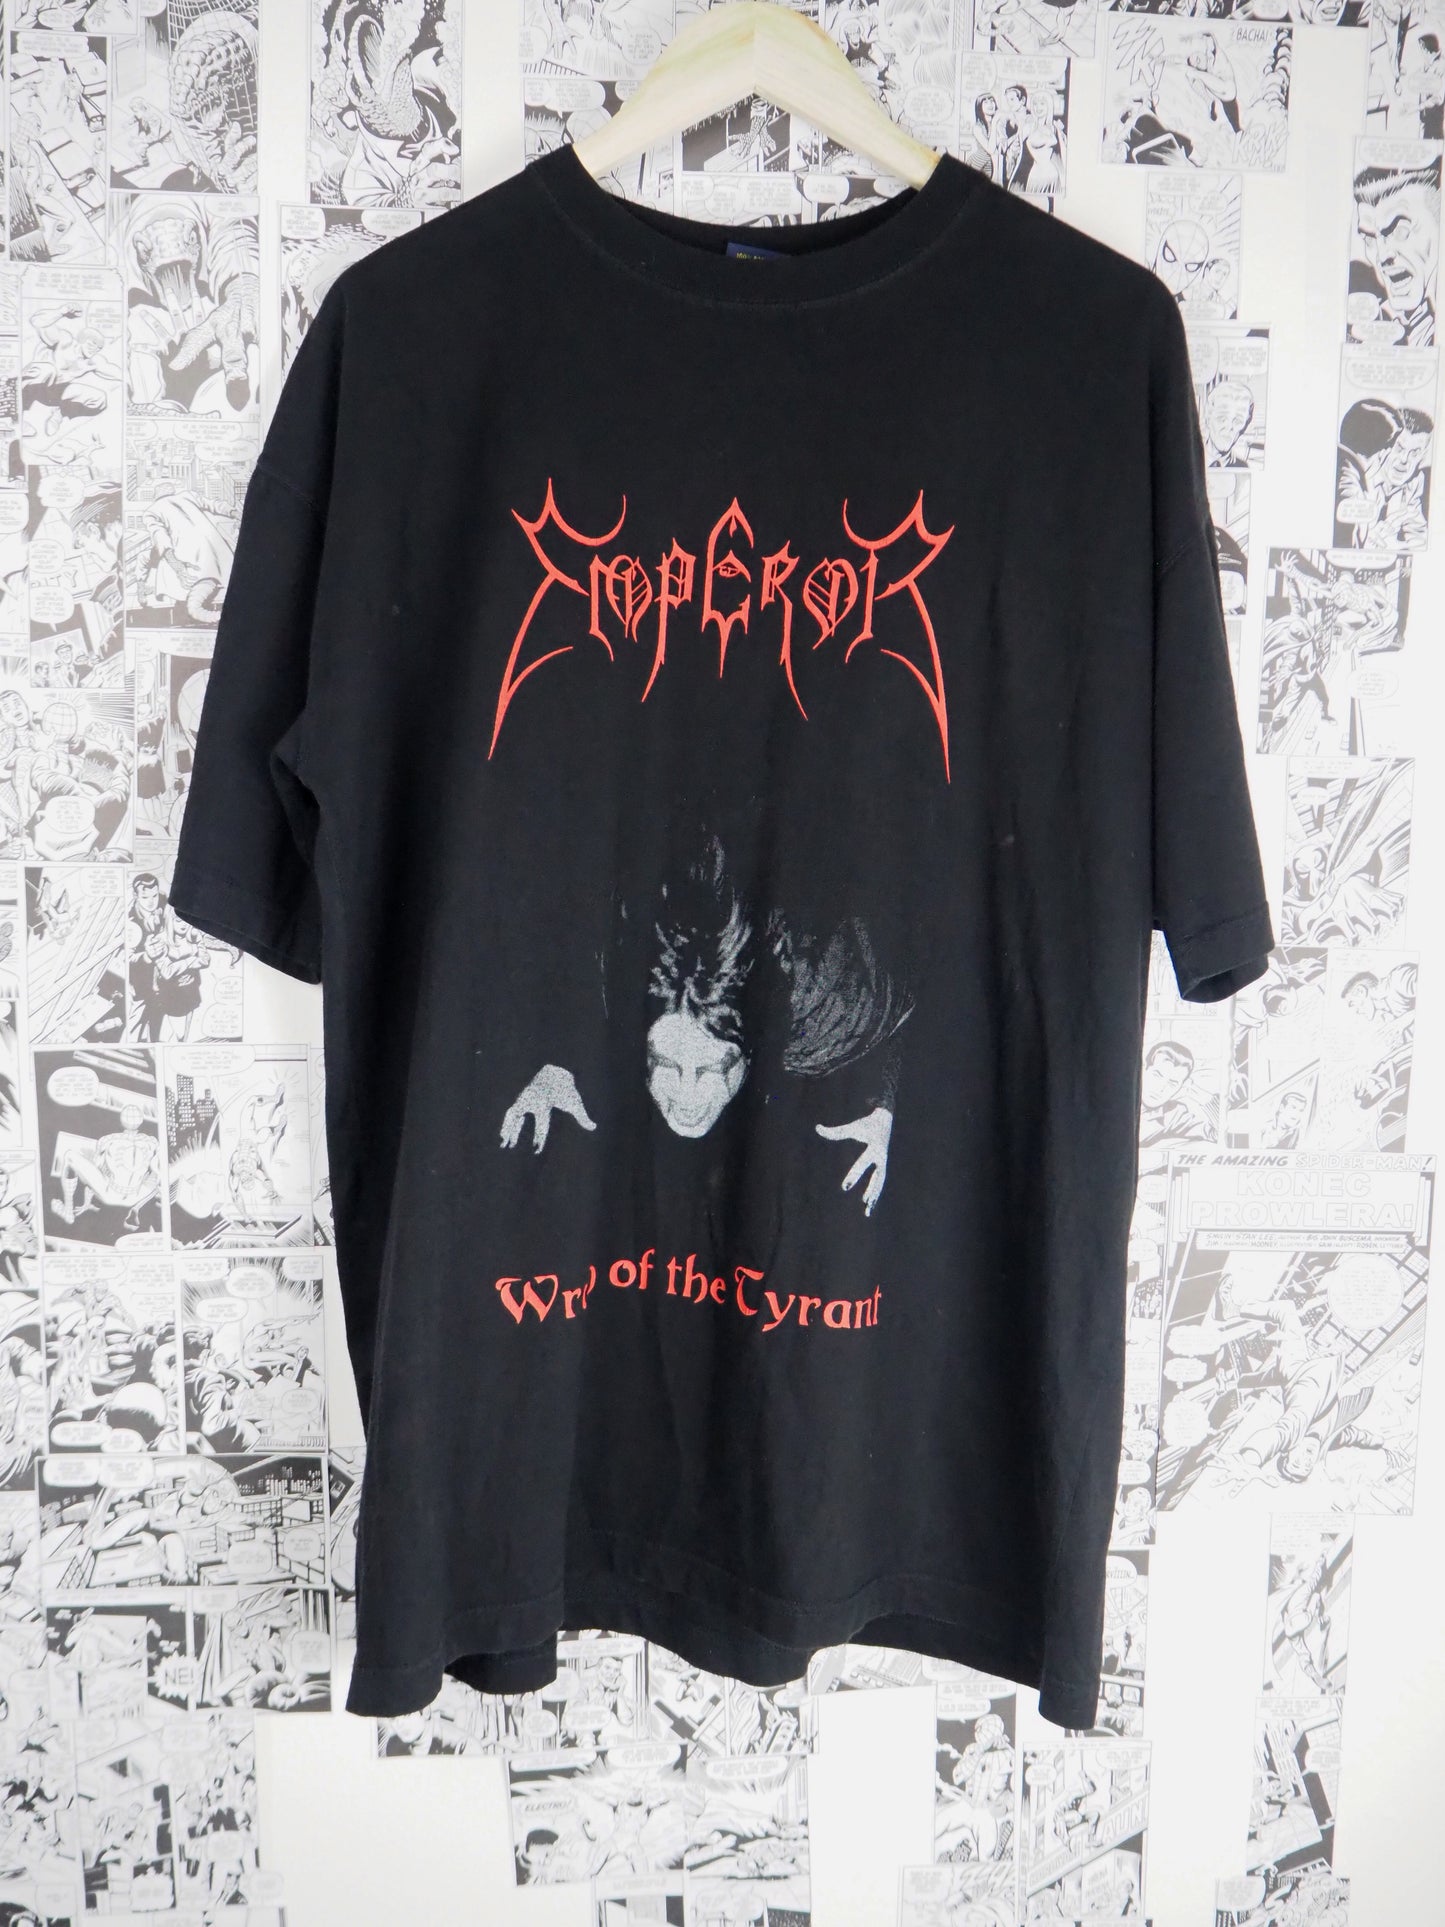 Vintage Emperor "Wrath of the Tyrant" 1992 t-shirt - size XL